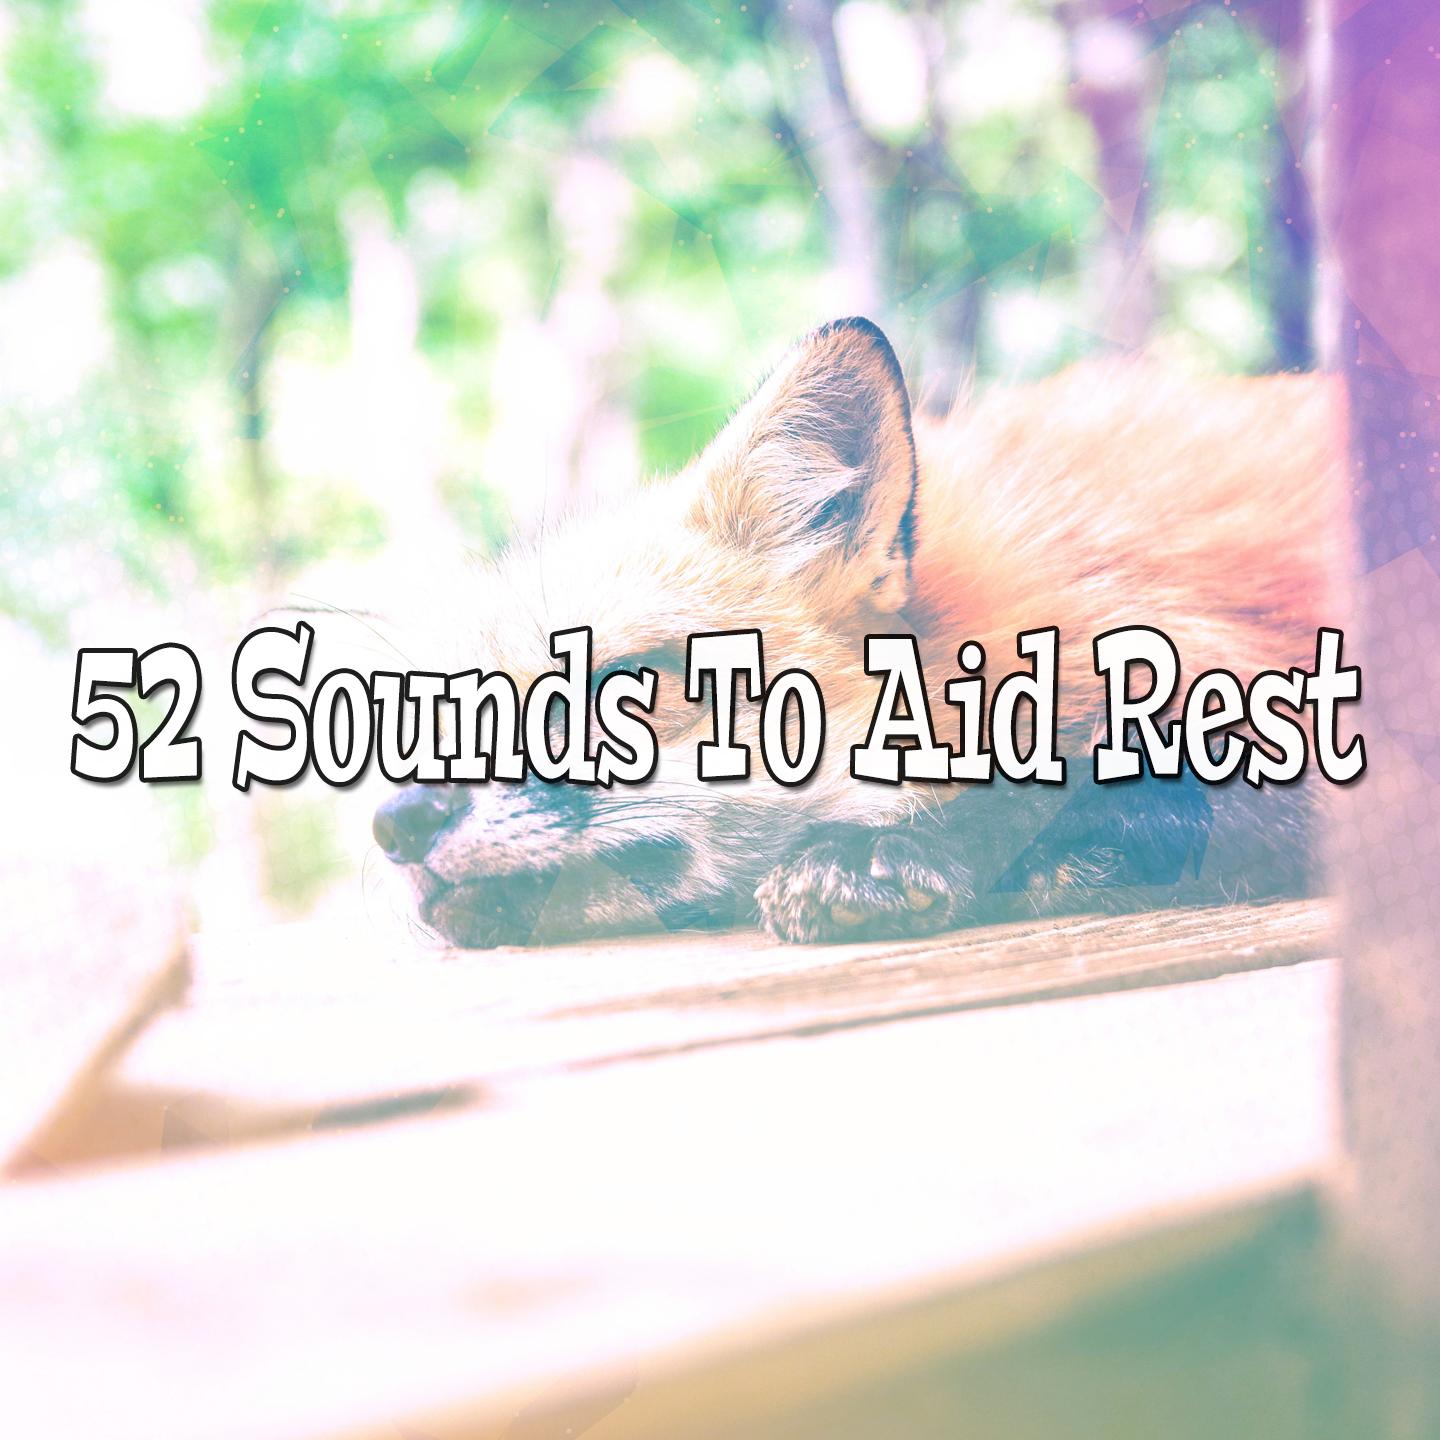 52 Sounds To Aid Rest